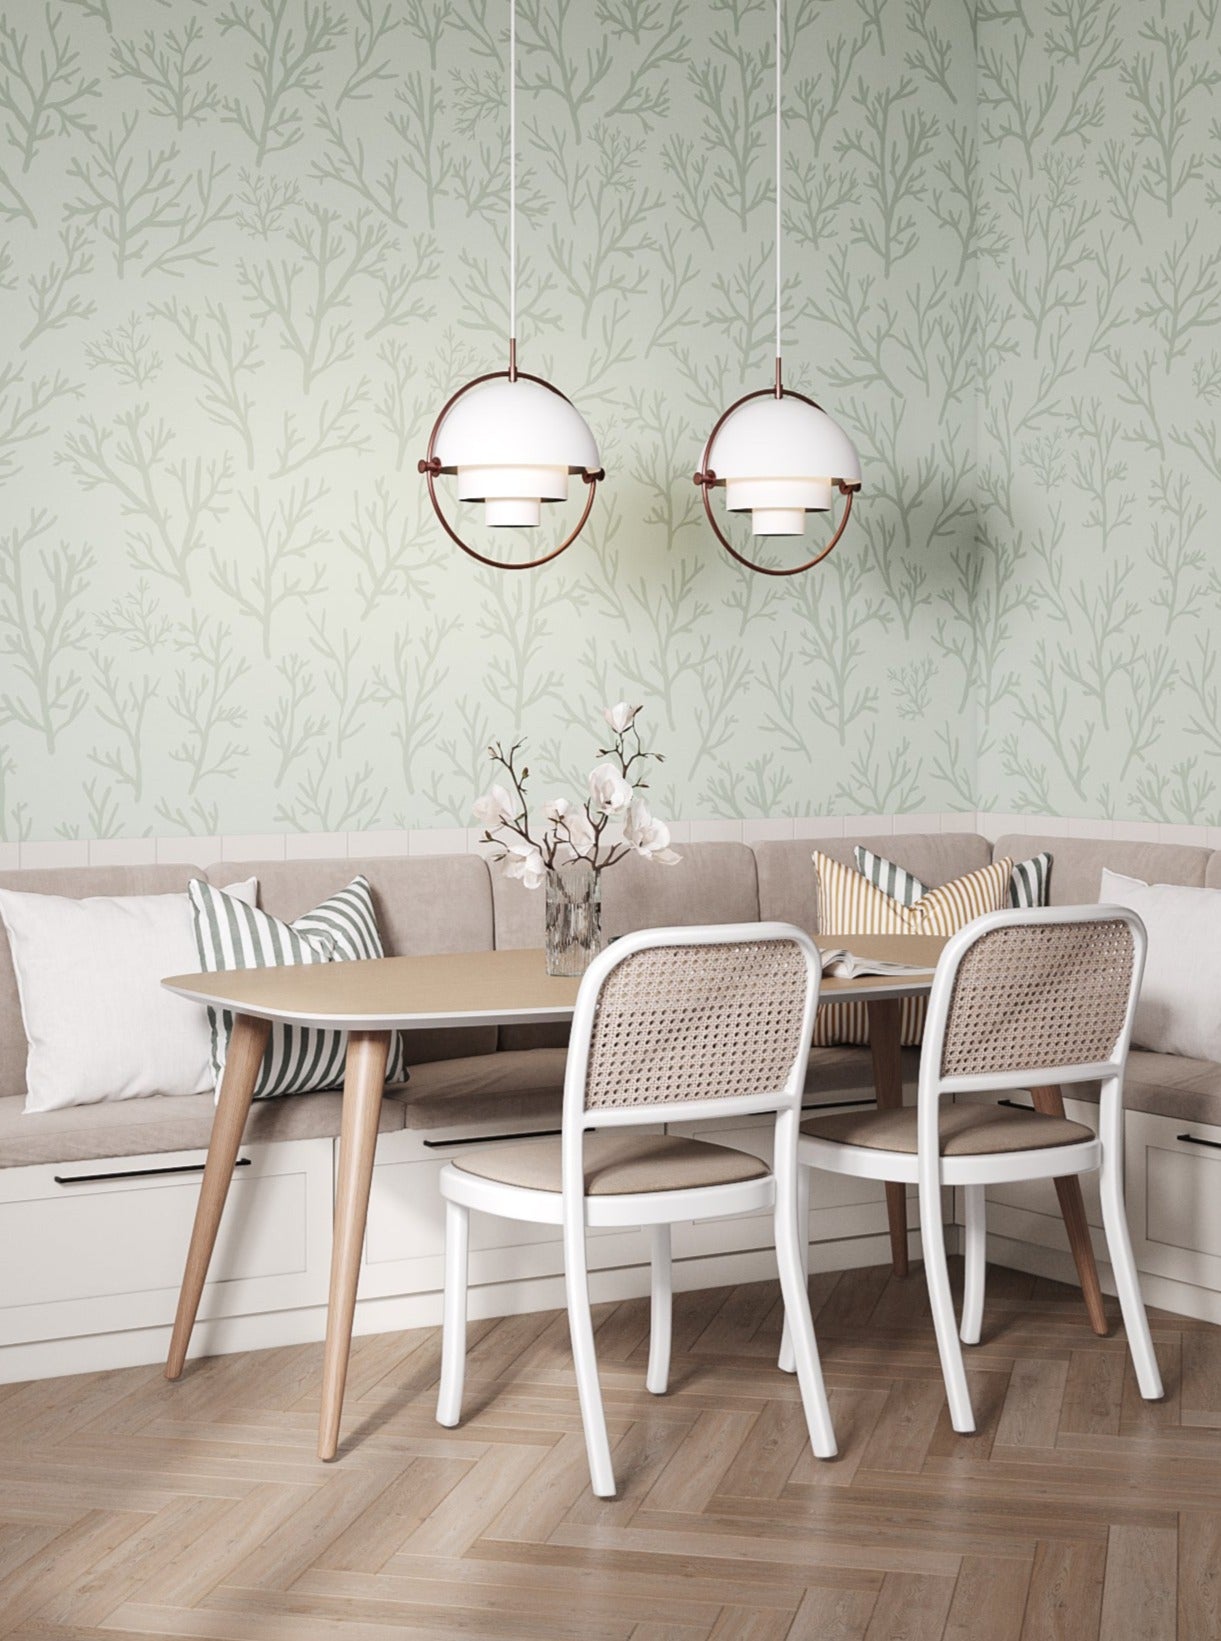 Saltwater Foliage, Pattern Wallpaper in dining room